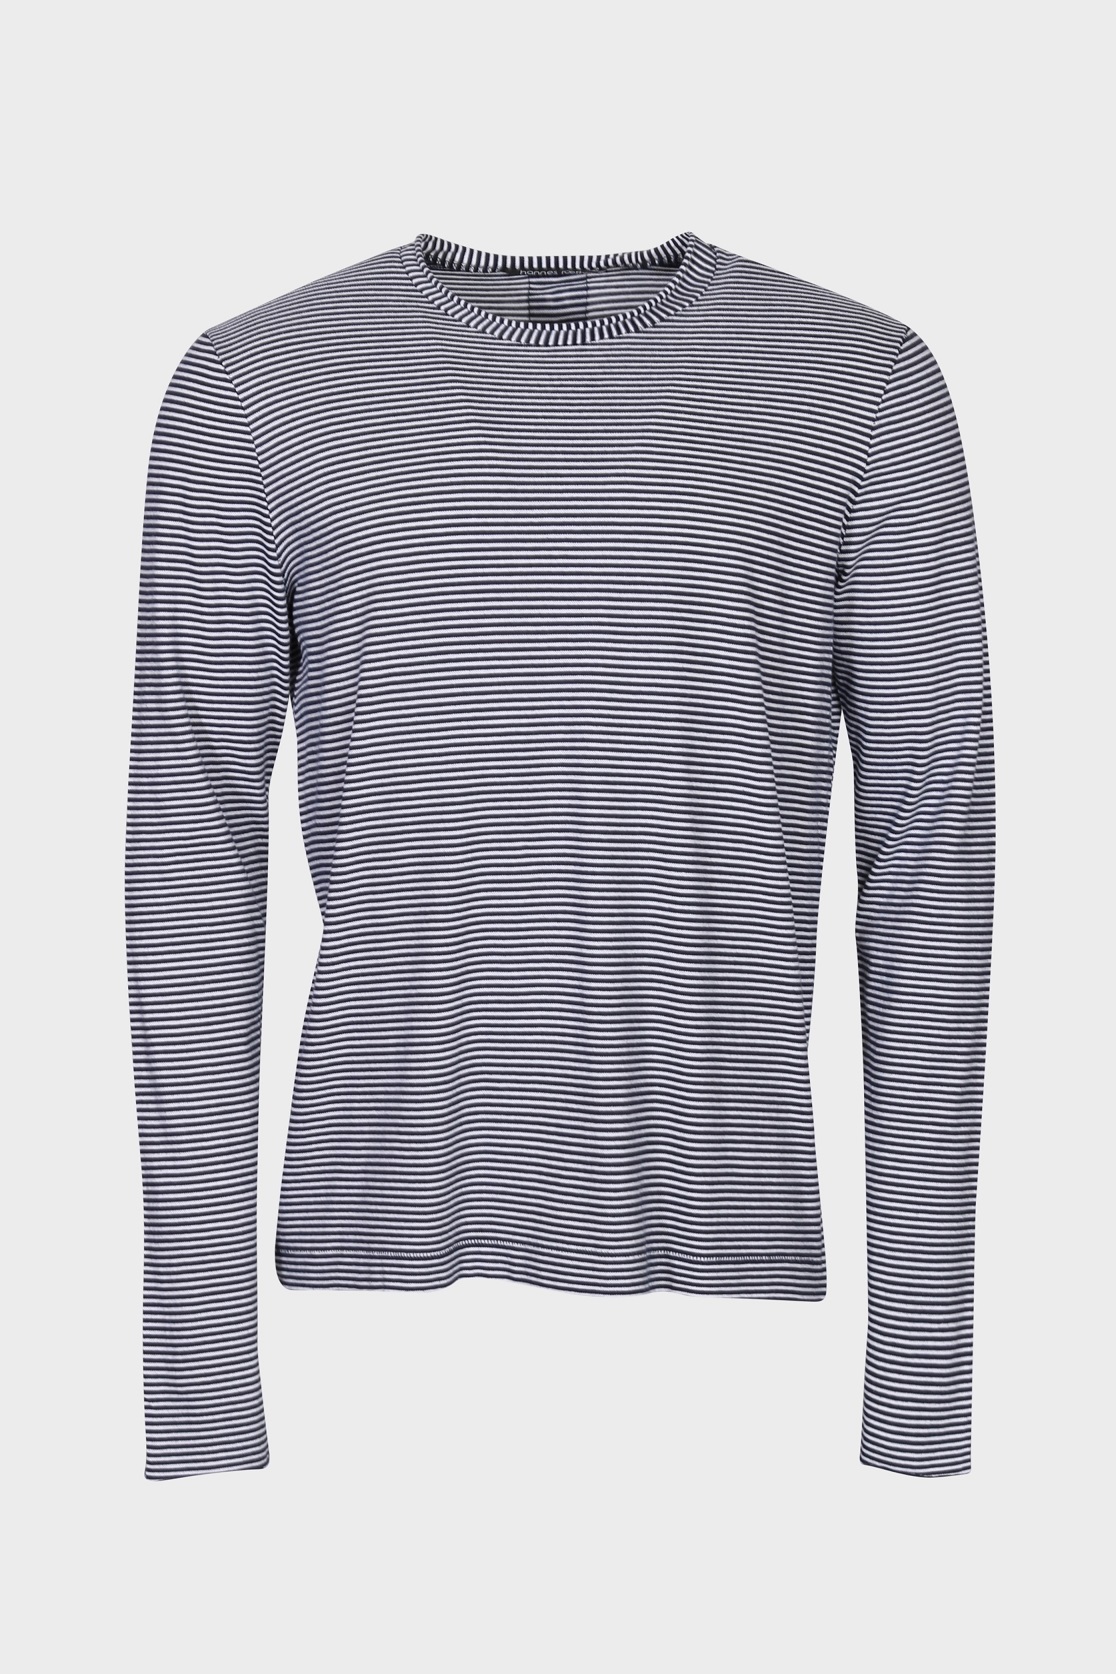 HANNES ROETHER Longsleeve in Navy/White Stripes XL